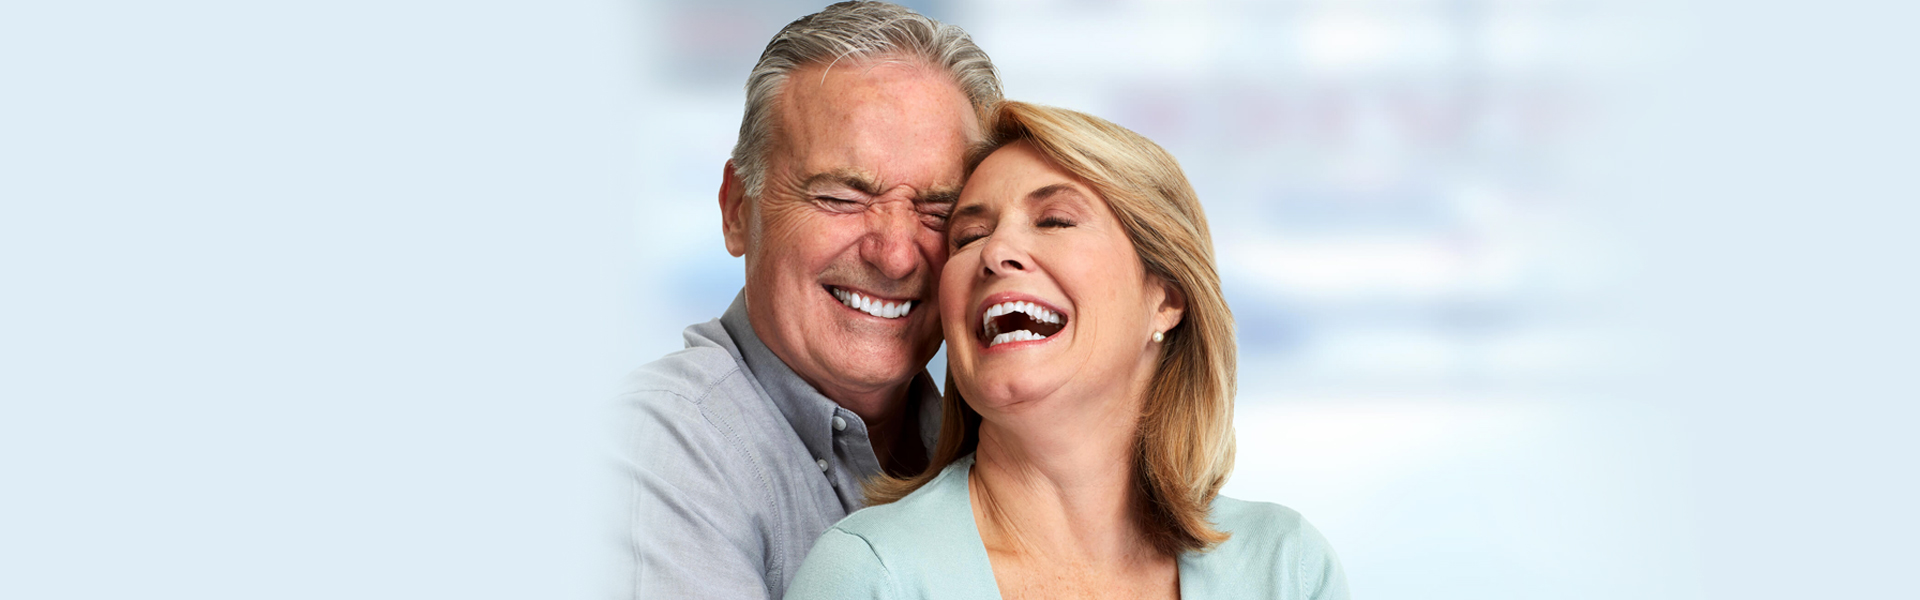 Dentures Vs. Implants: How to Choose Right One